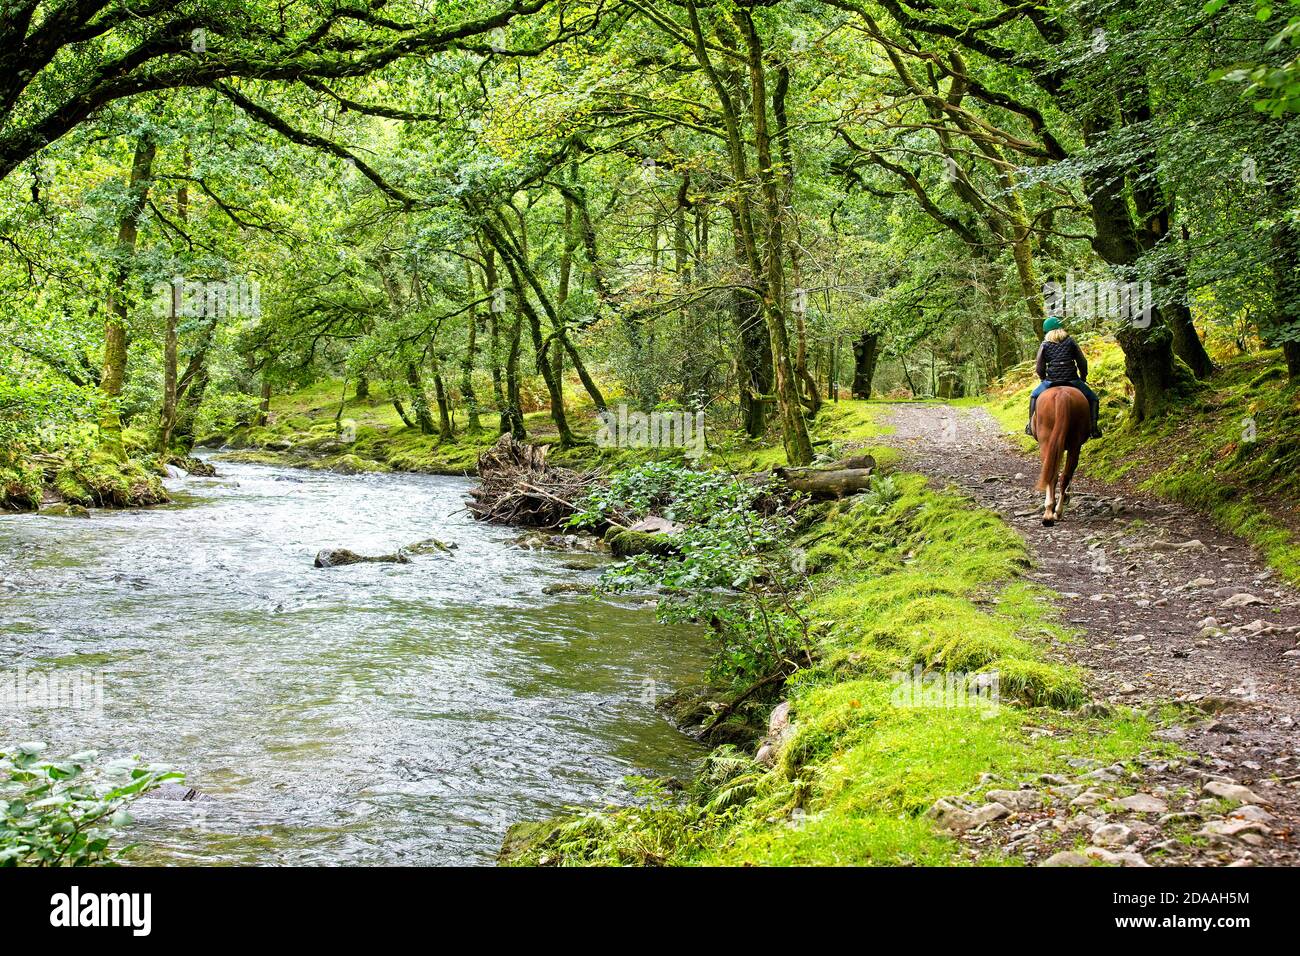 A Bridlepath runs beside the River Walkham in a wooded valley on the edge of Dartmoor near Grenofen, Devon, England, UK. Stock Photo